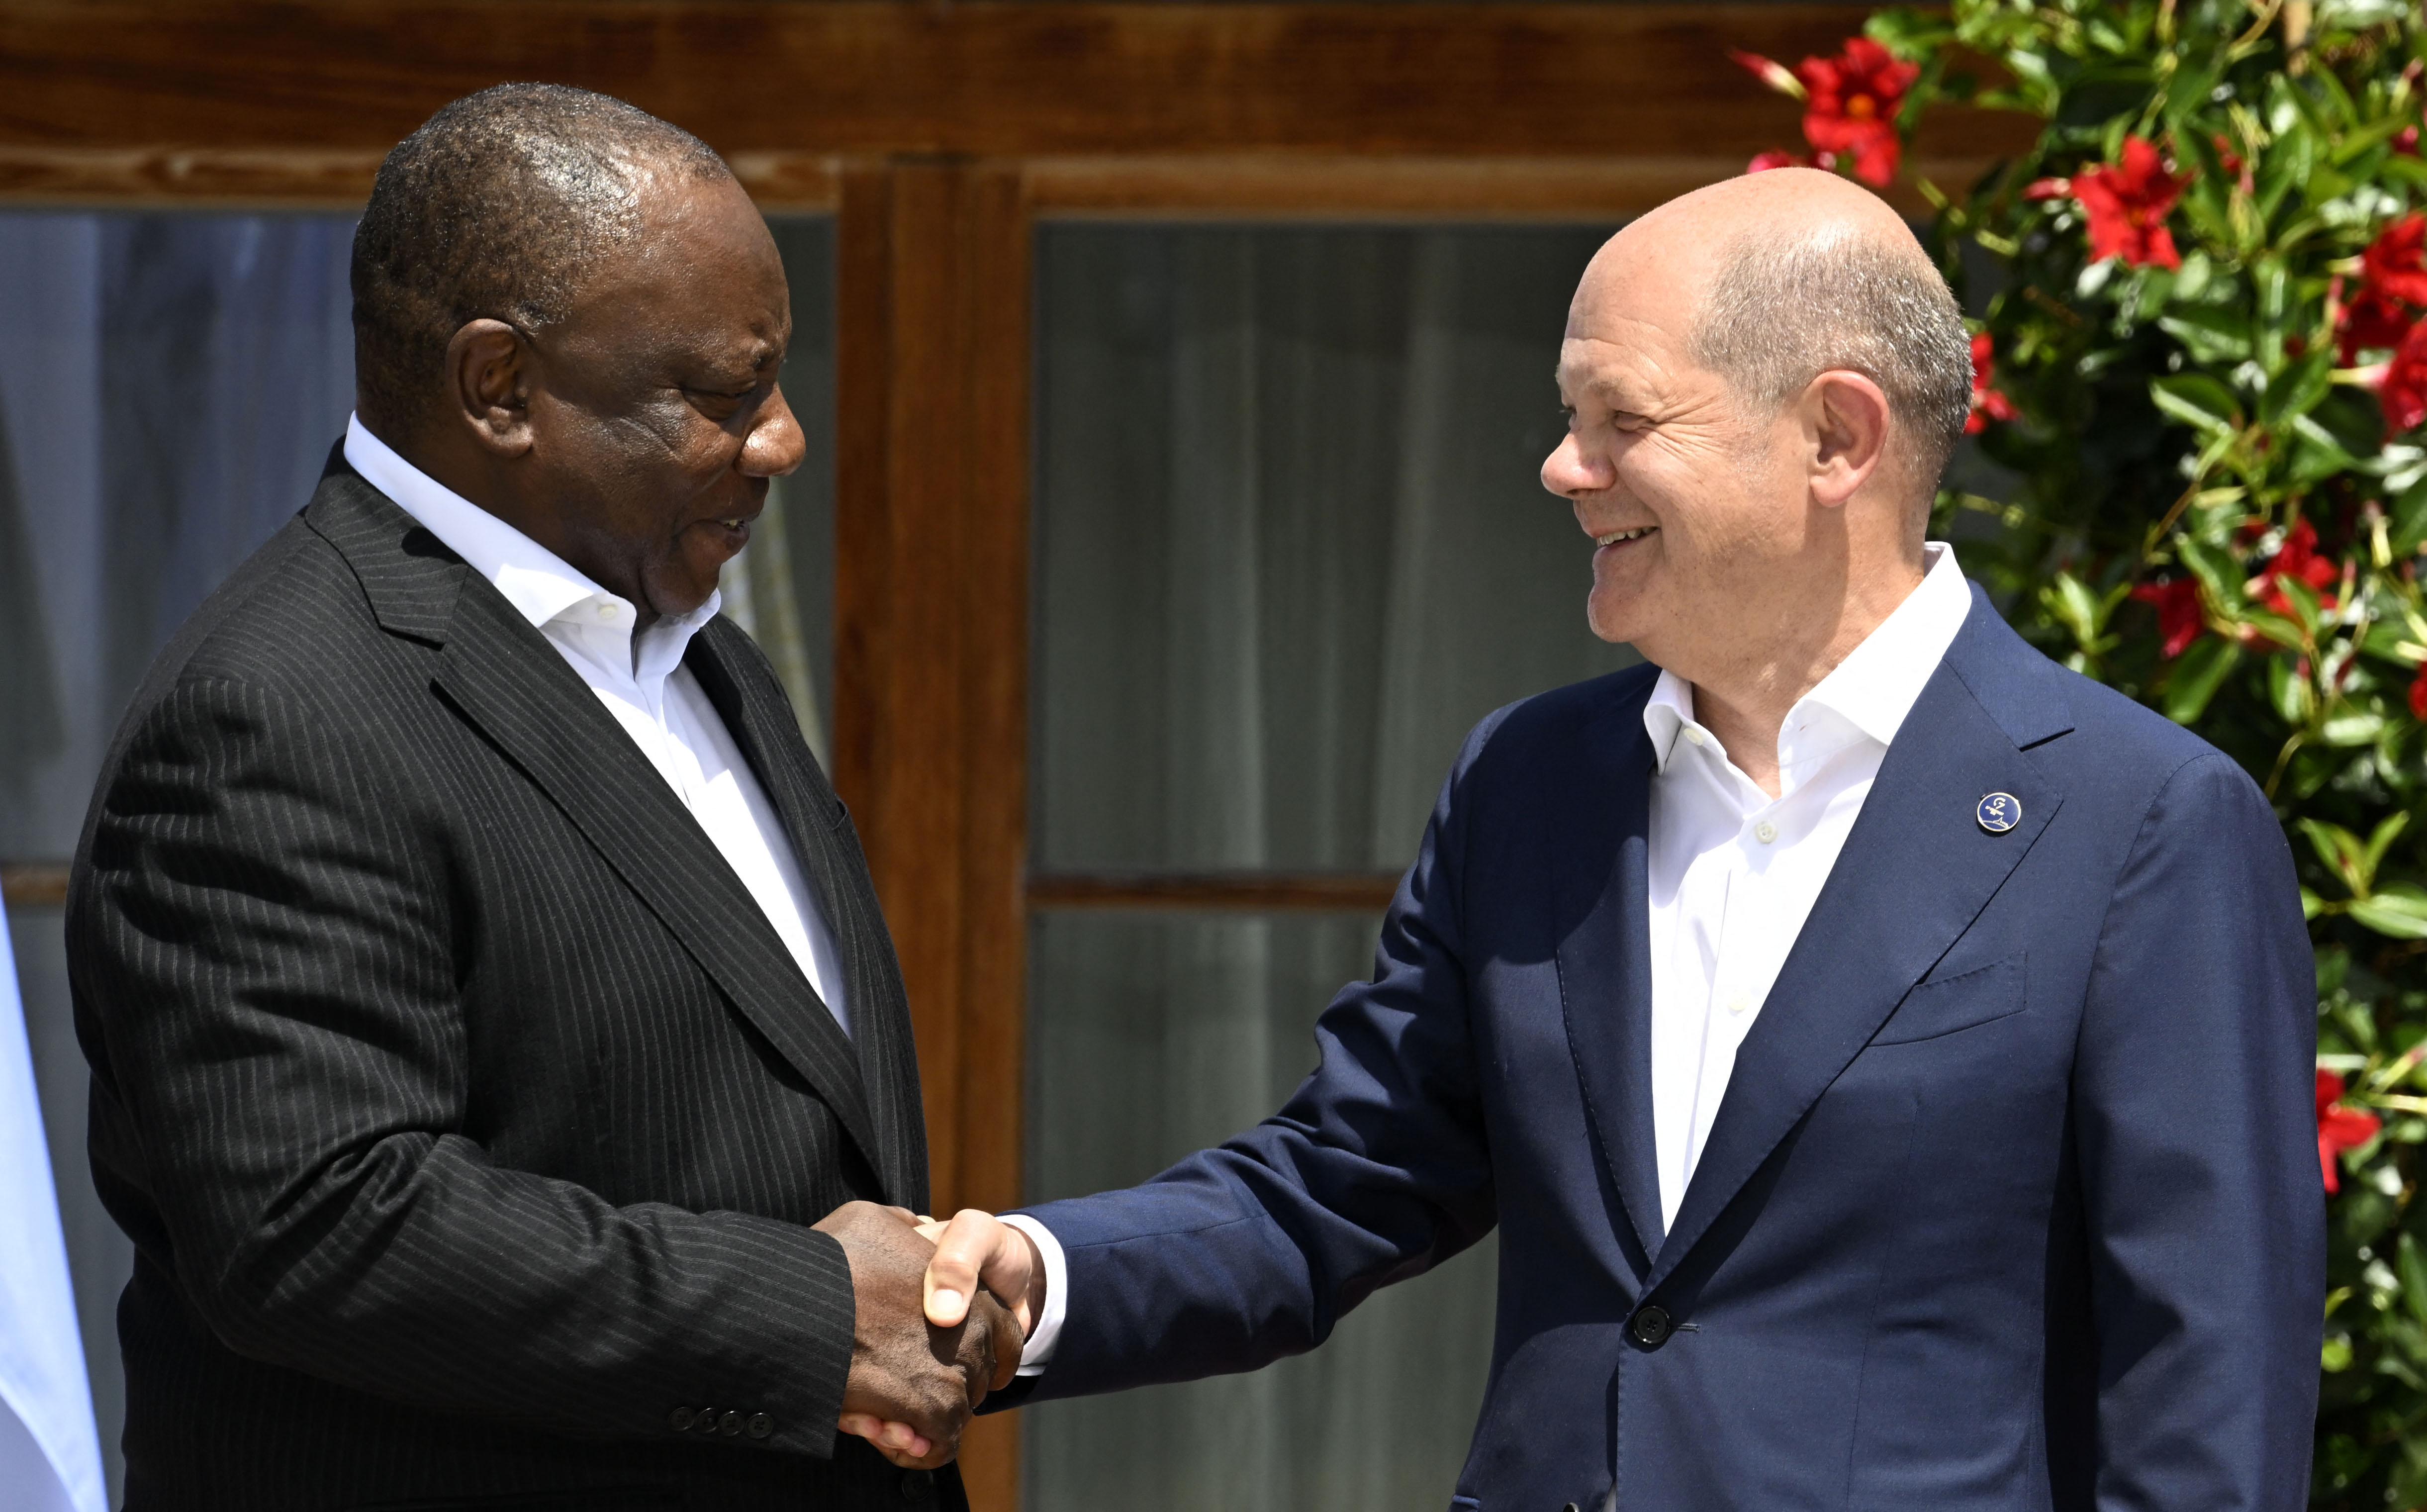 Cyril Ramaphosa and Olaf Scholz in June 2022 at Elmau Castle in Germany.